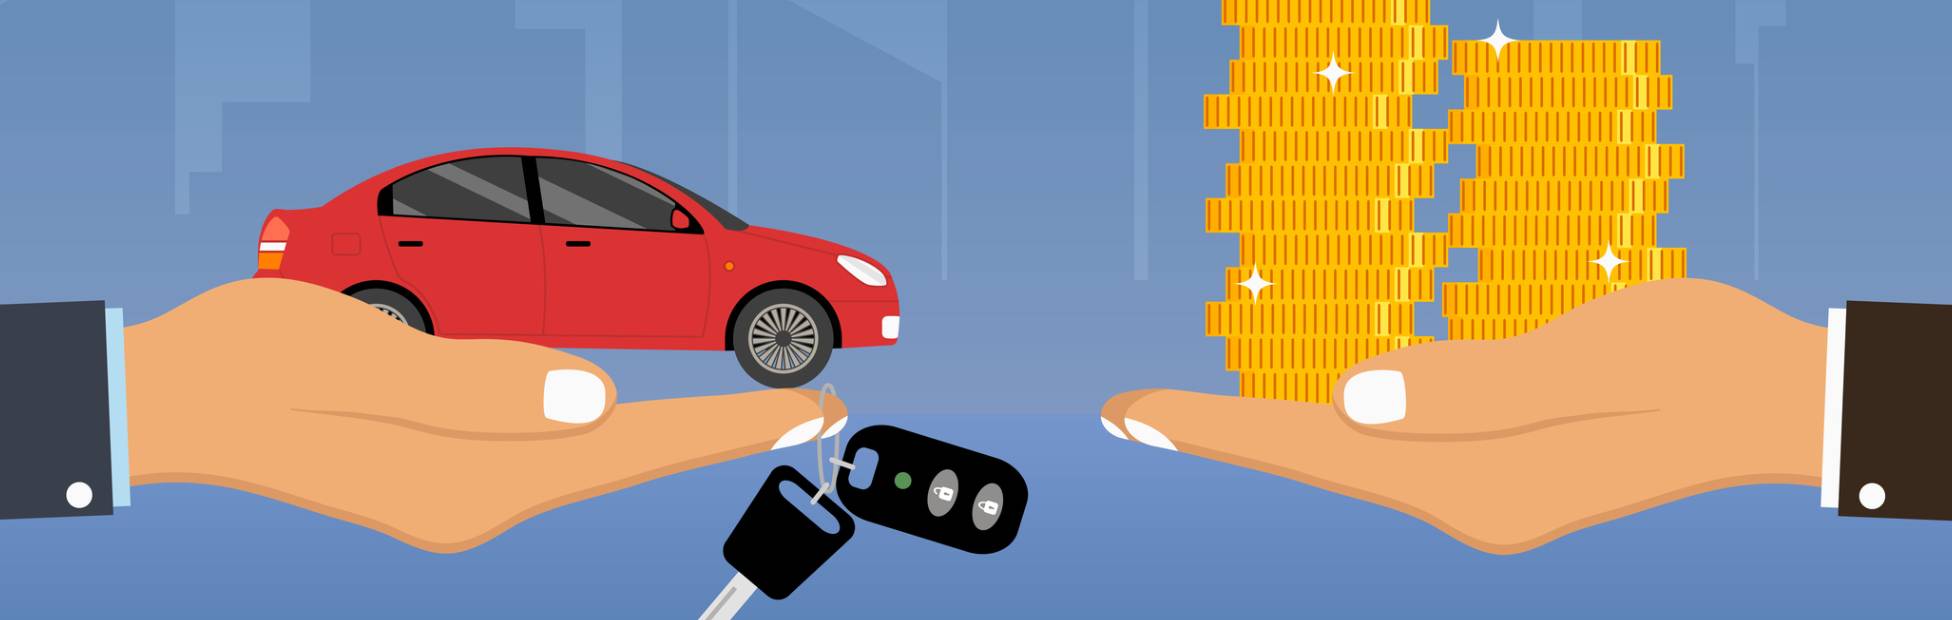 Illustration of hands holding car and stack of coins.